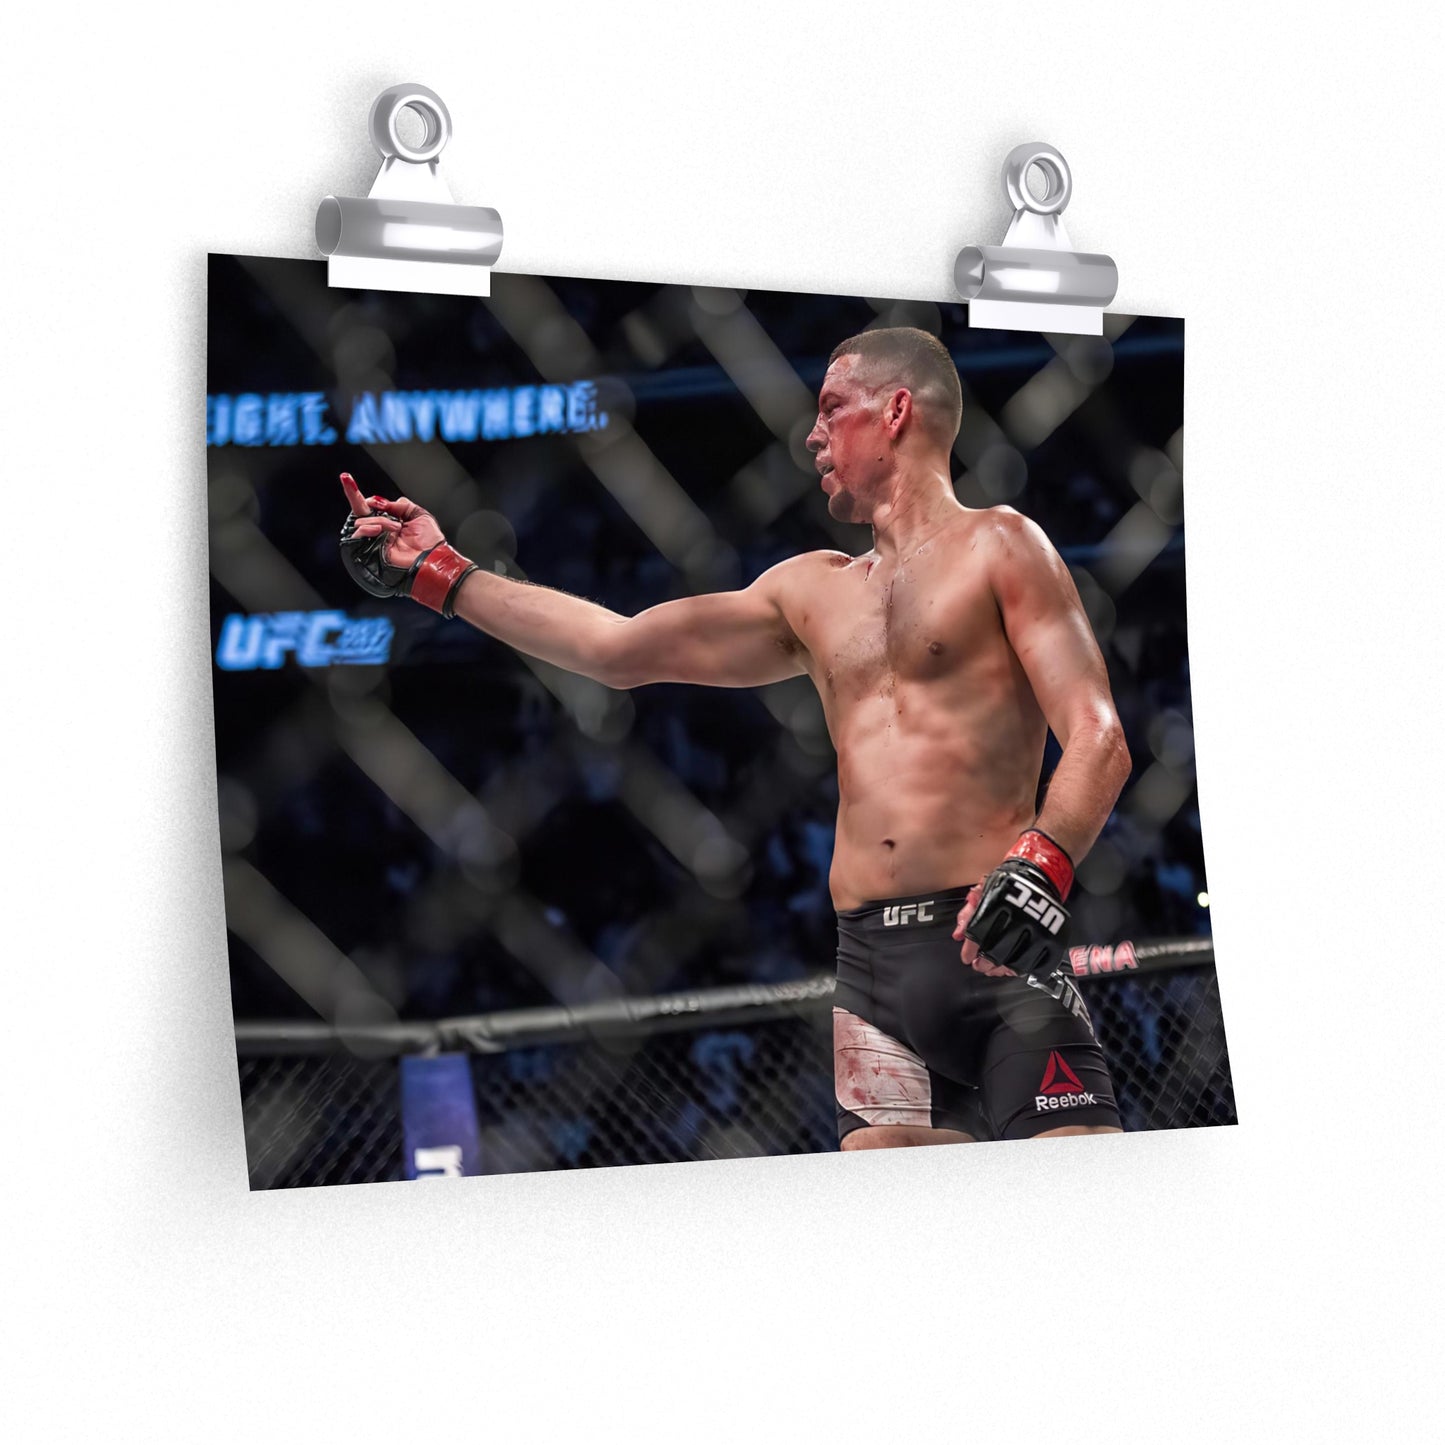 Nate Diaz Flips Off His Opponent In The Cage Poster